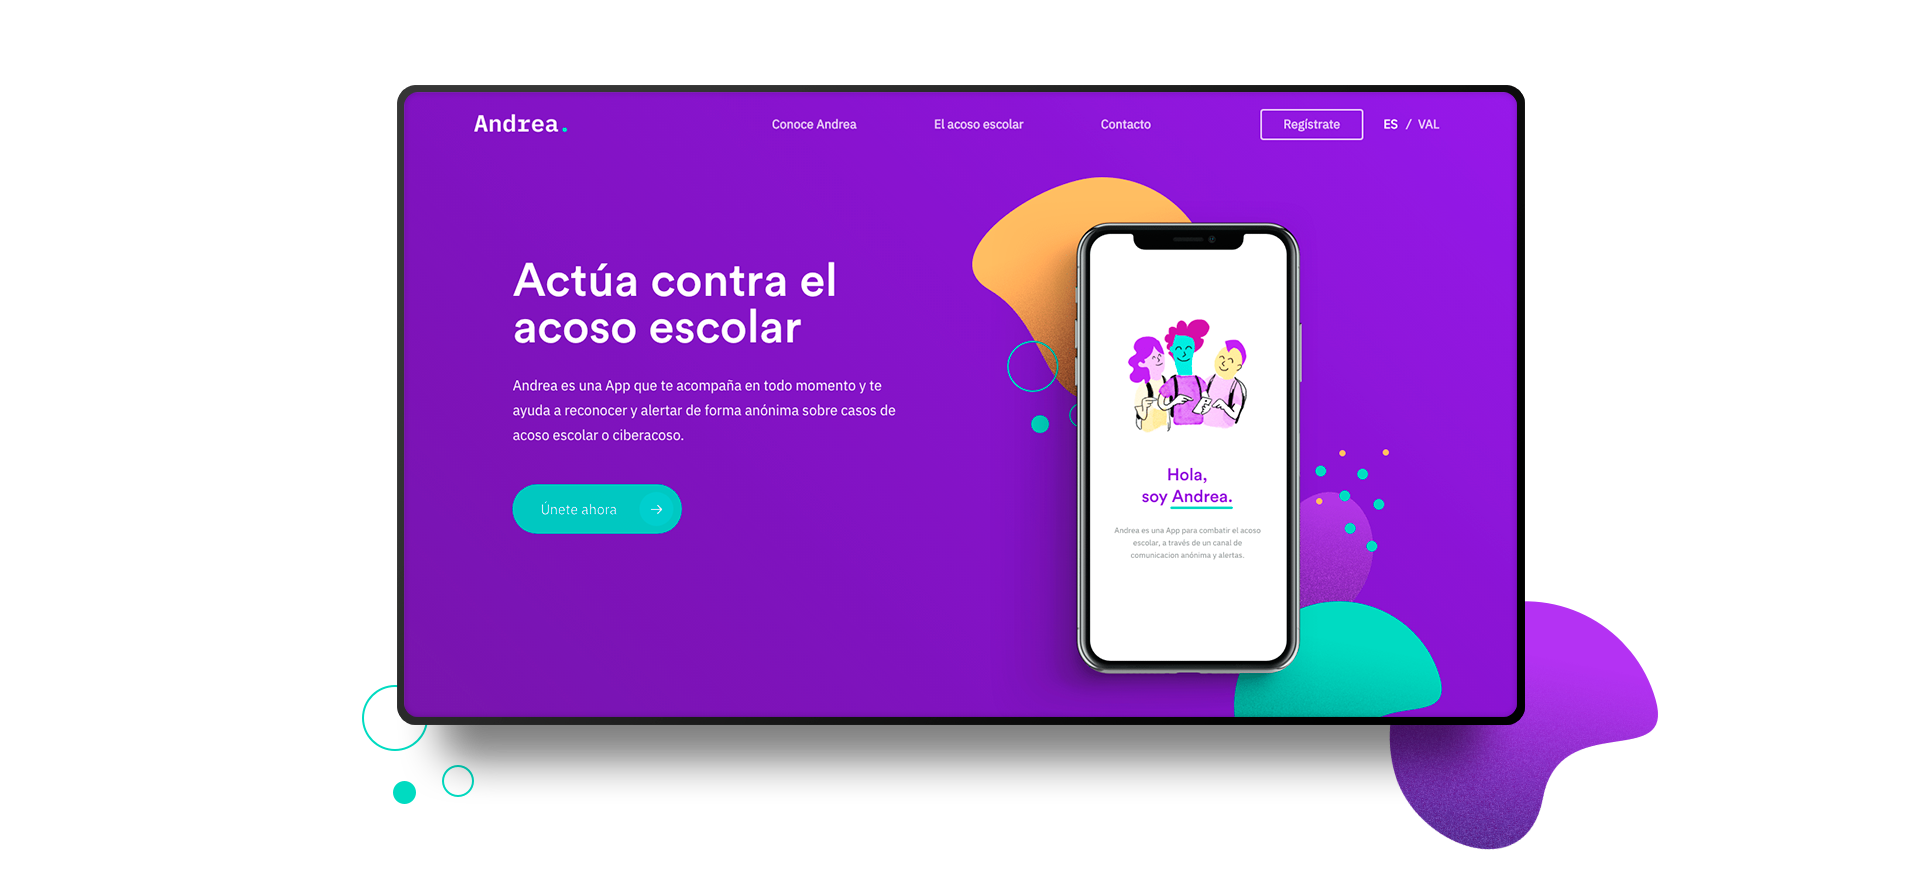 Andrea, the App to combat bullying is launched in Valencia